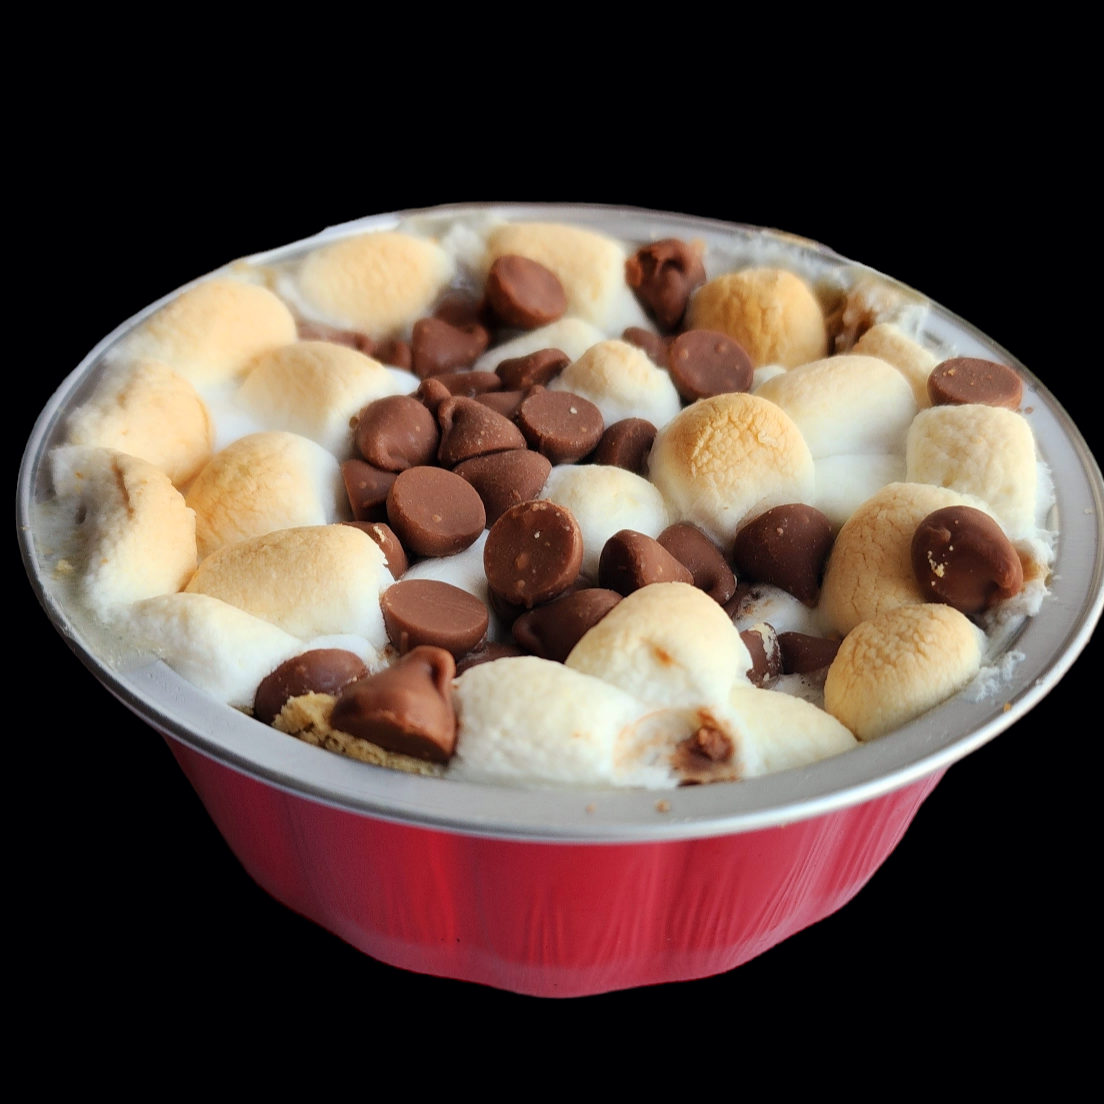 Smores skillet cookie with bake roasted marshmallows and melted chocolate chunks. Skillet baked cookie from Skillet cookie company.Order online skillet baked cookies Canada wide delivery. Toronto cookies